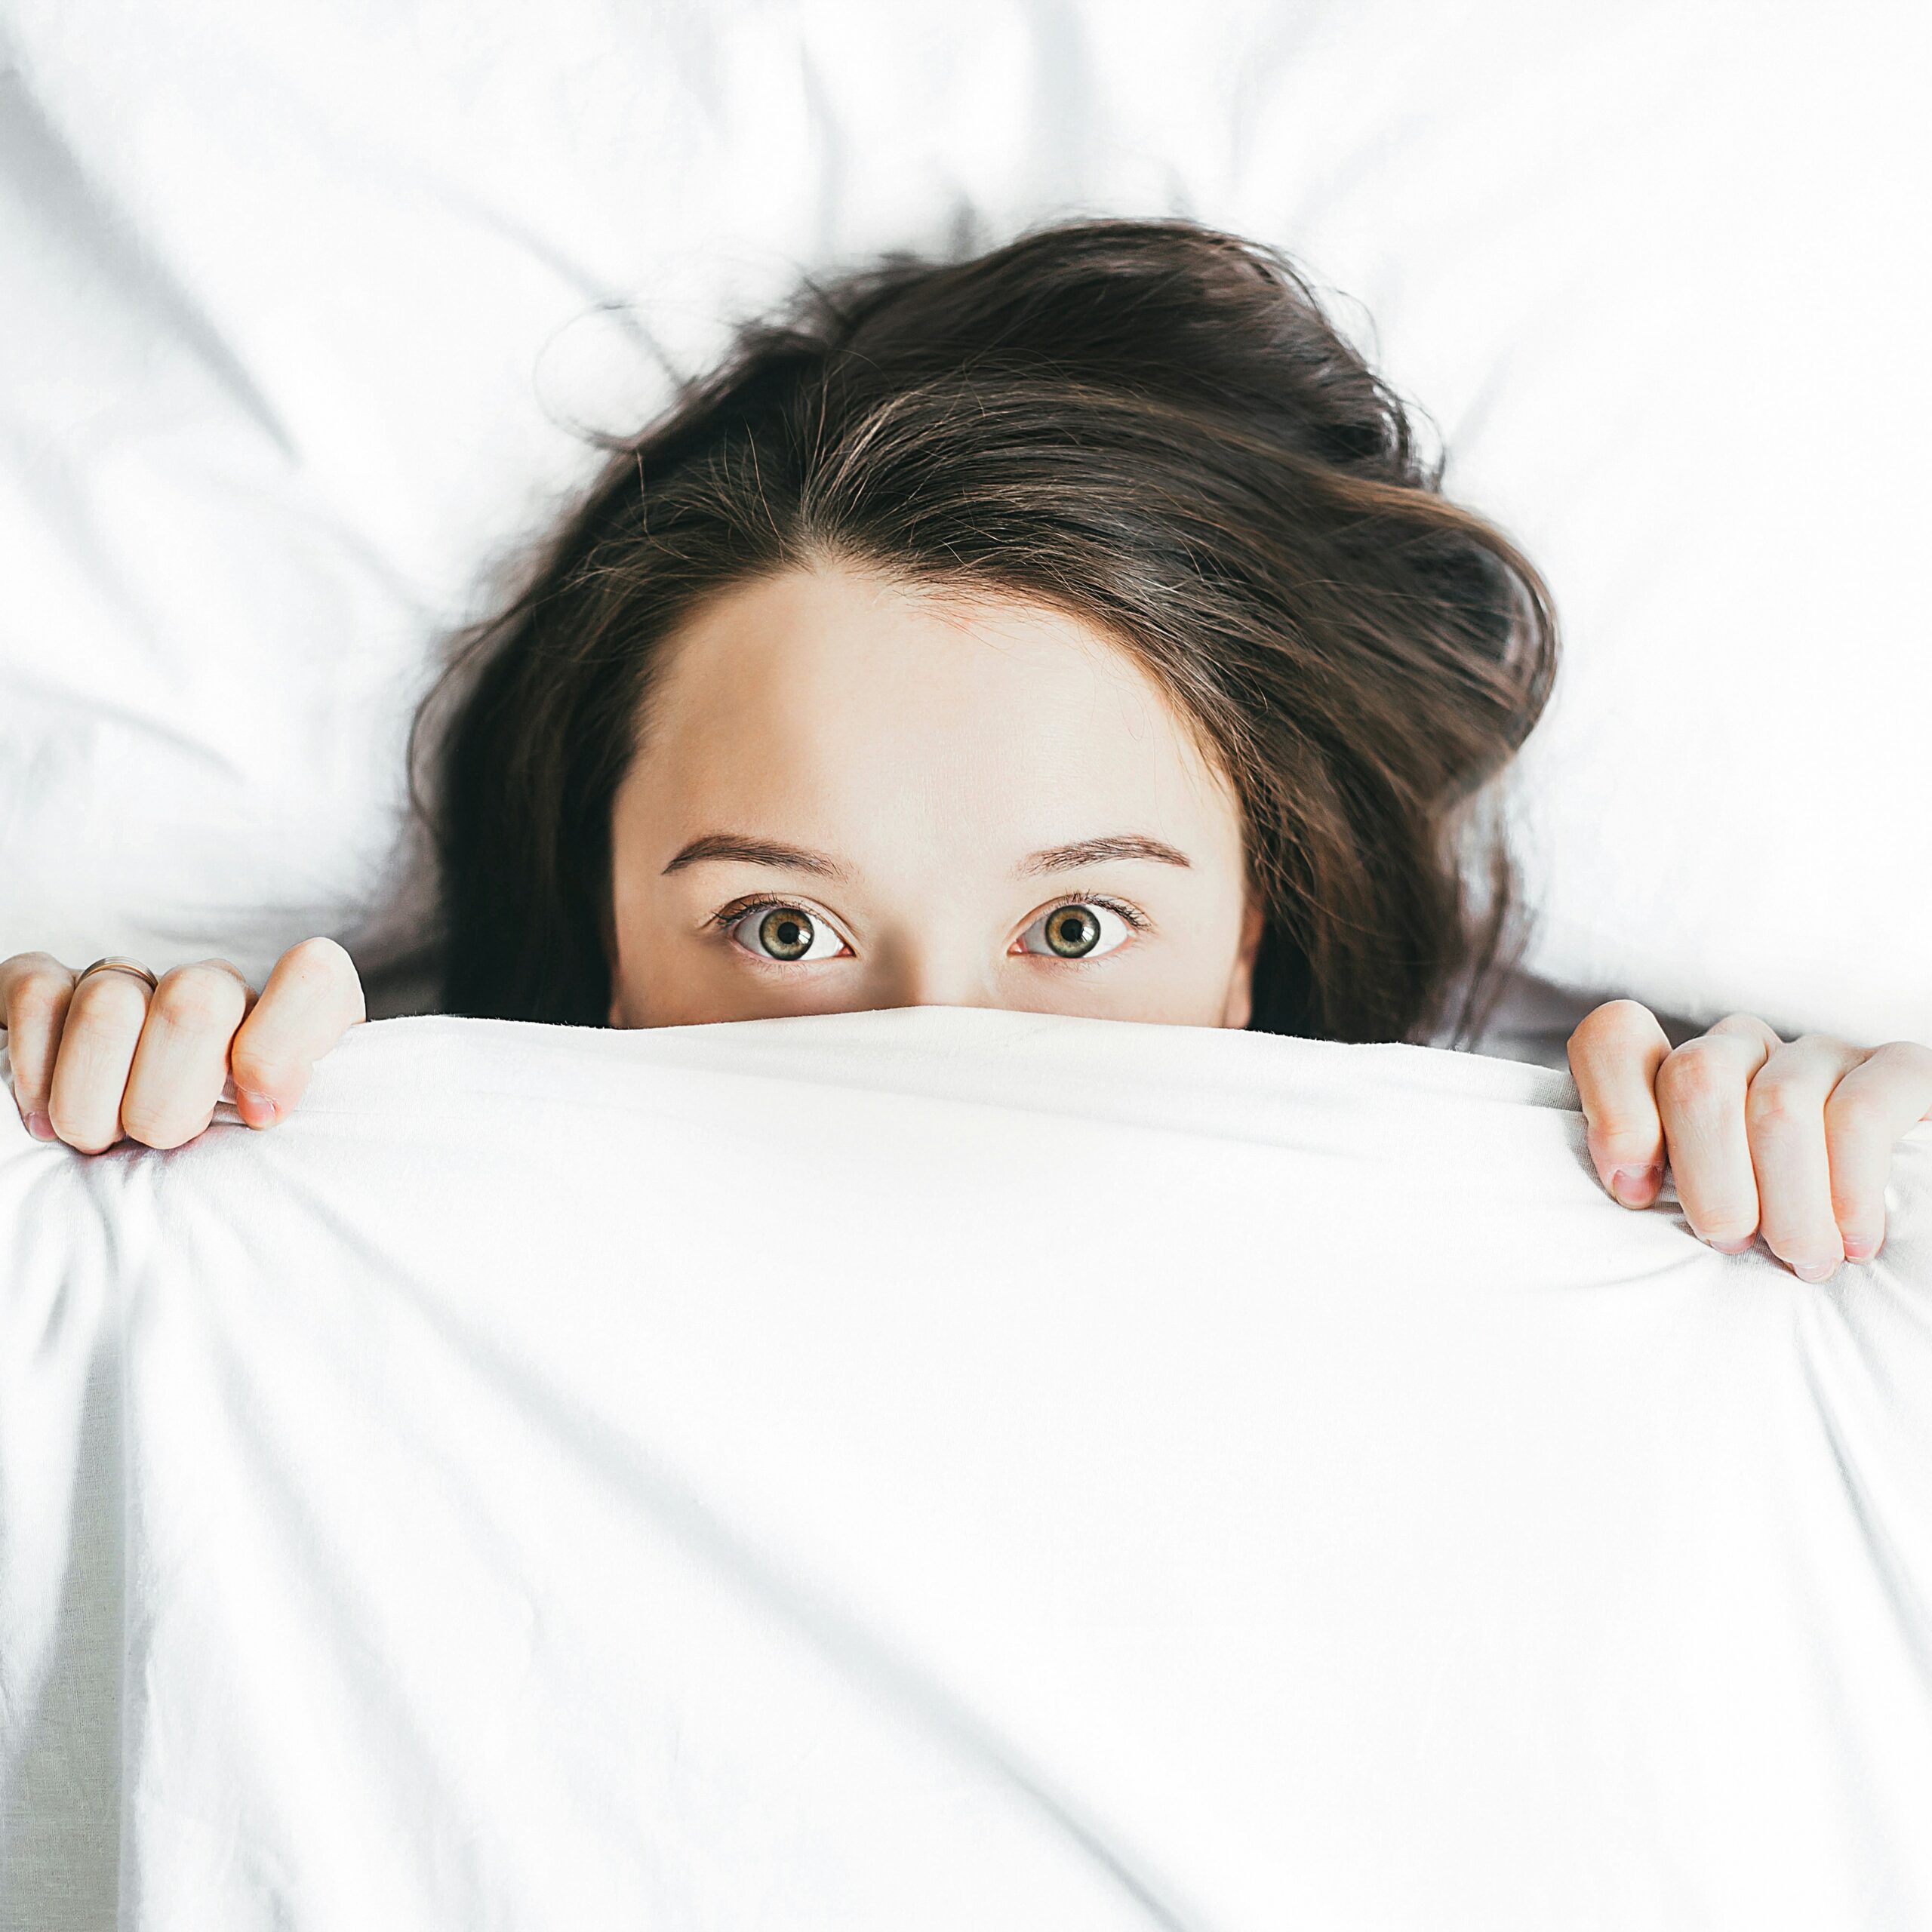 Woman peering from under the covers.